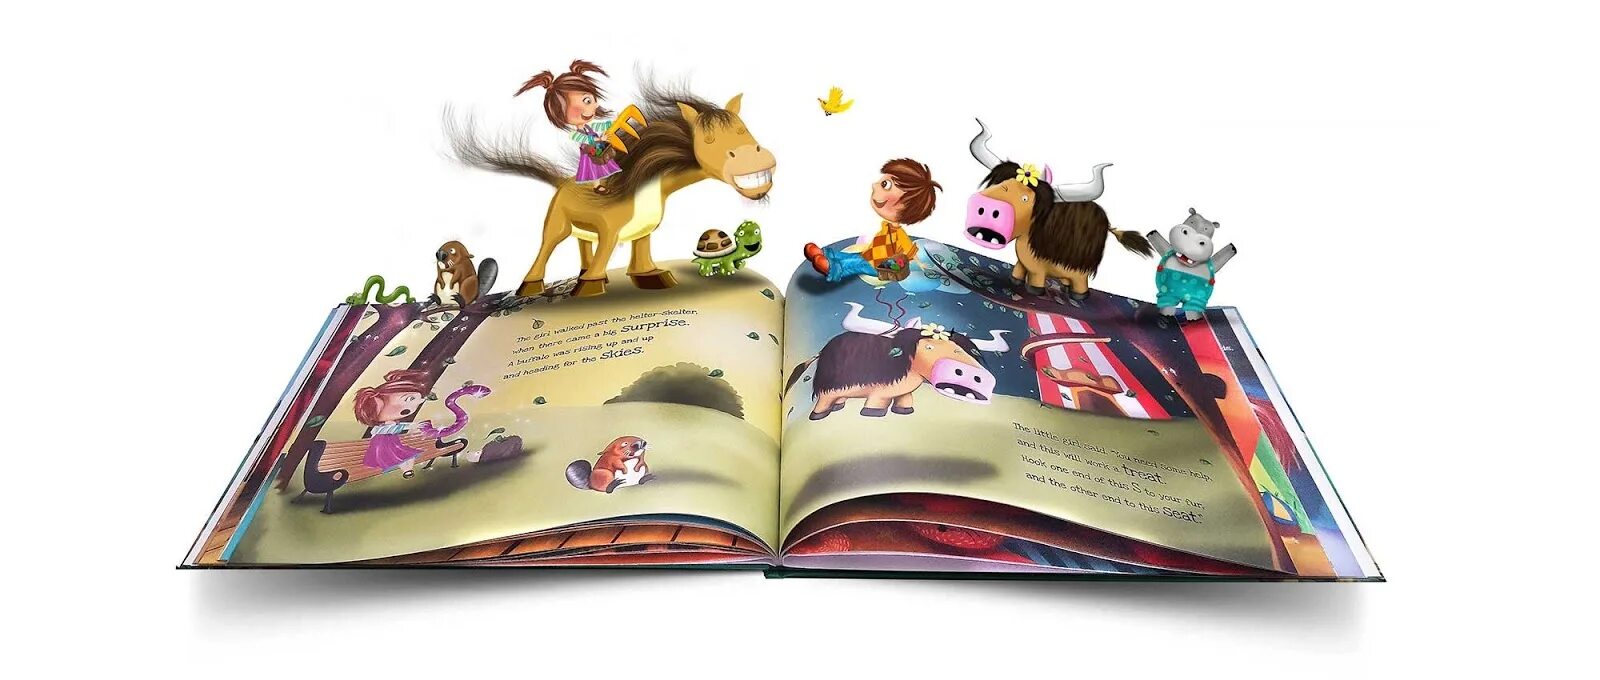 Story book. The create книжка. Create a story book. Picture story books детские.